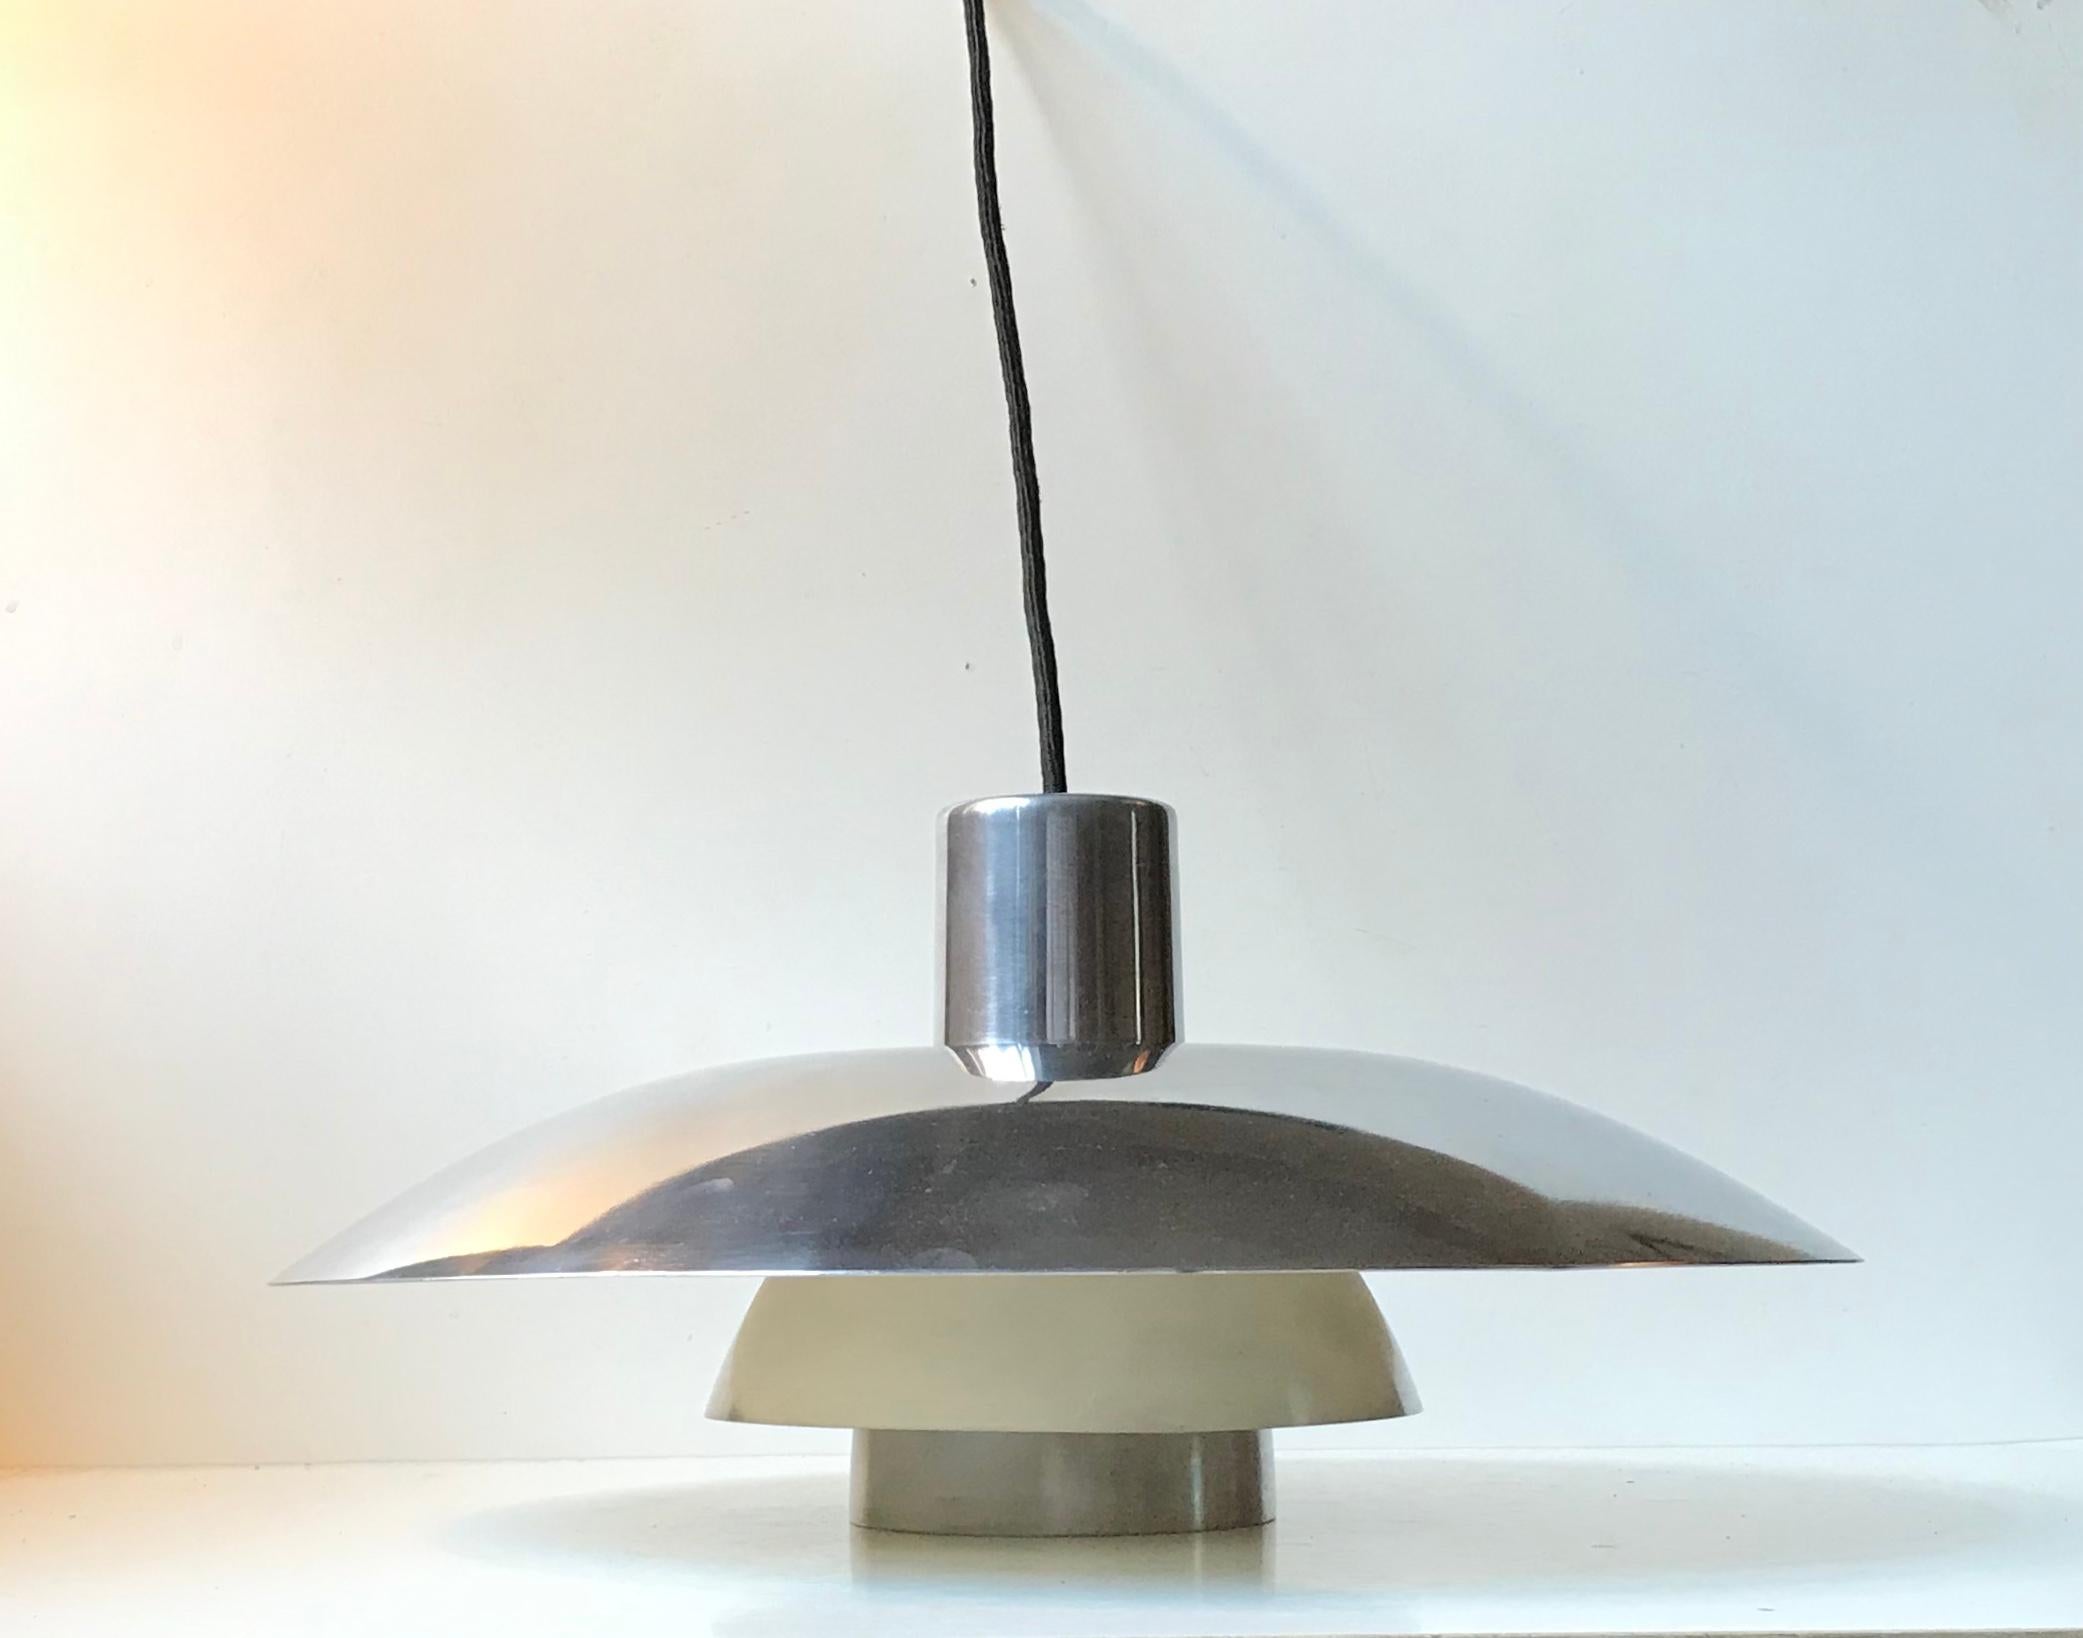 The PH 4/3 pendant light was designed in 1966 and this one is an example for this period. This light features its original porcelain fitting and outer shades in custom polished steel executed aftermarket rather nicely. The inner shades has its